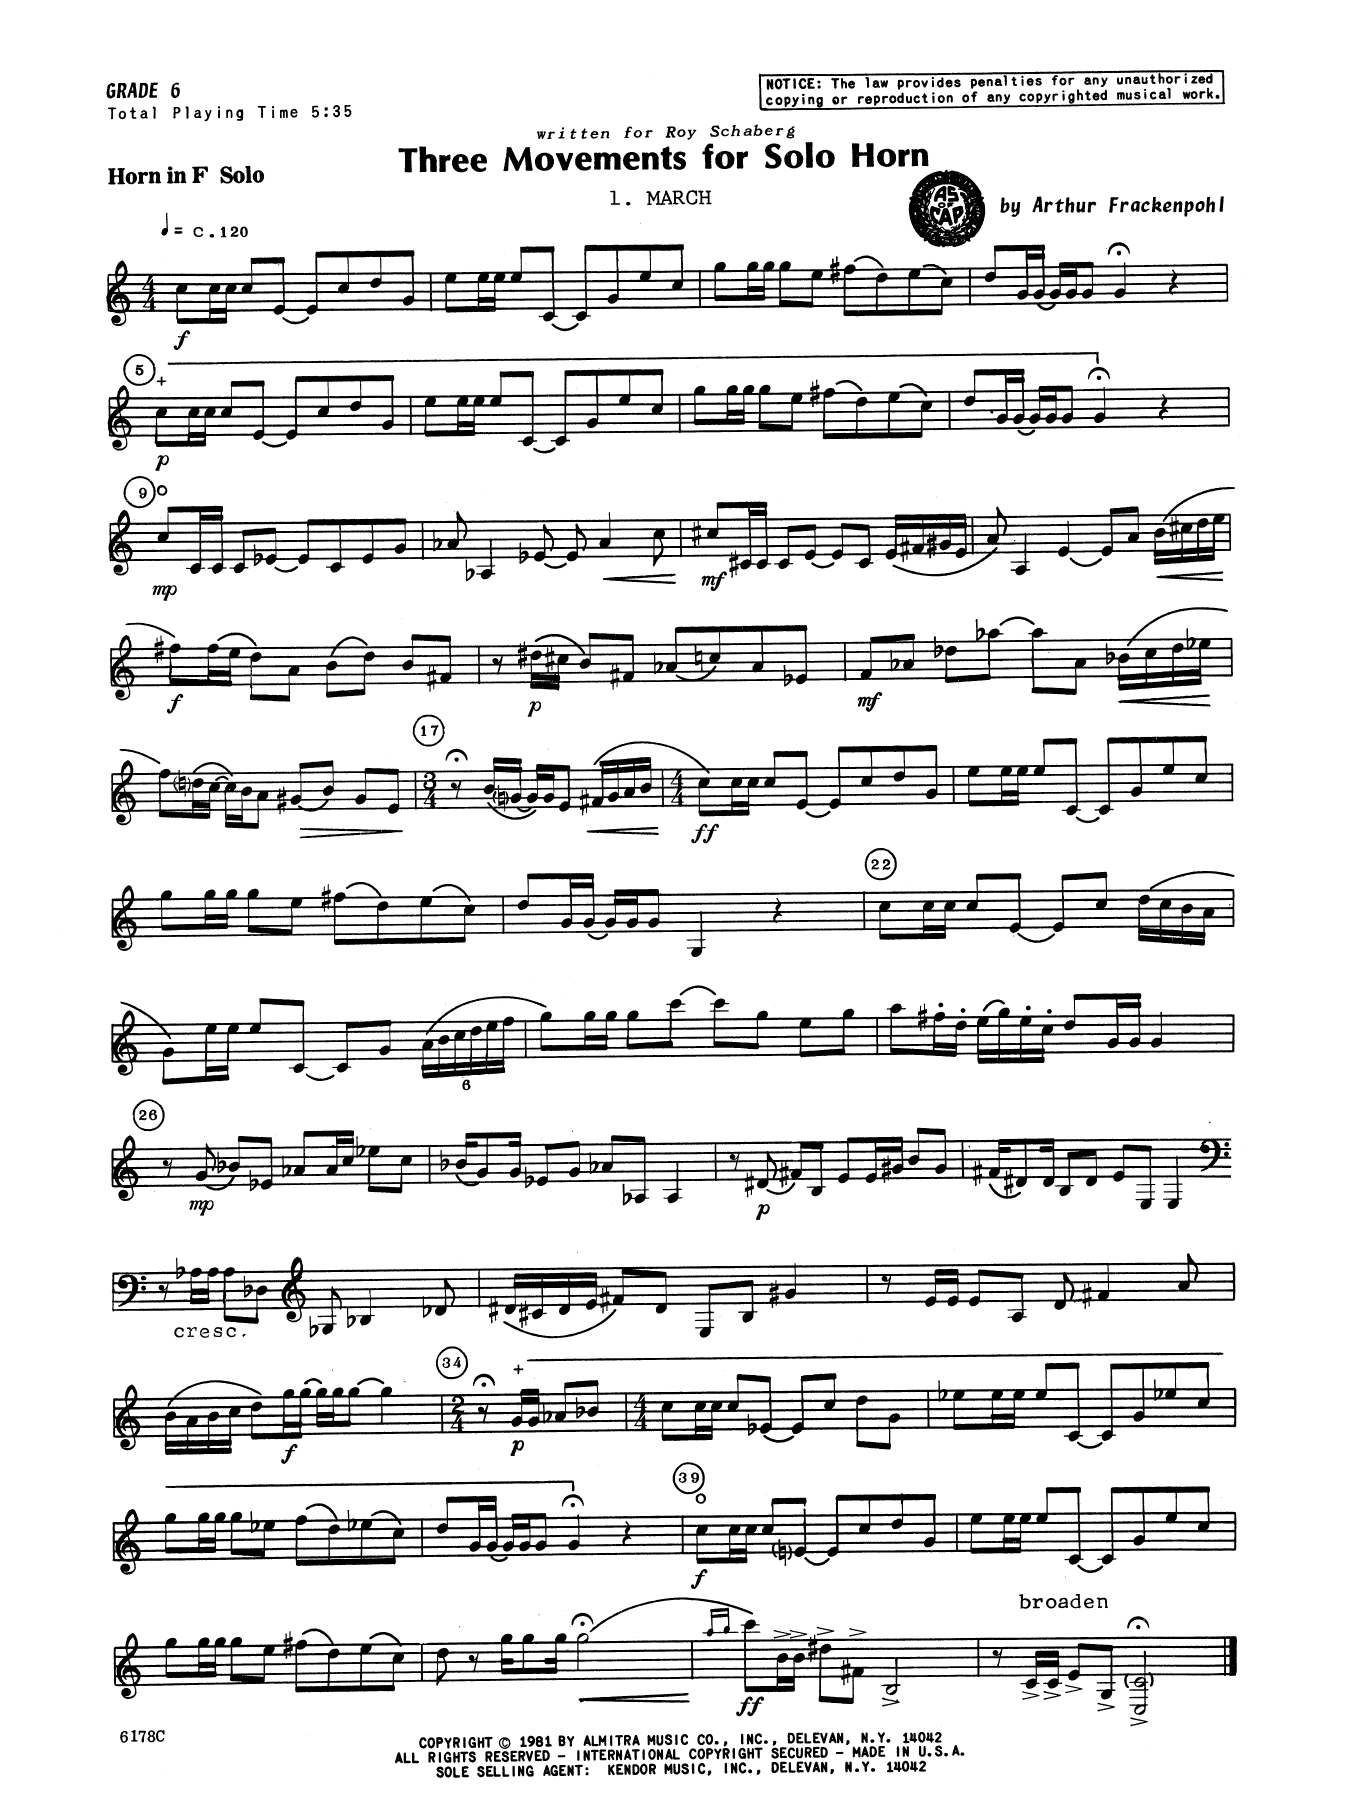 Download Arthur Frankenpohl Three Movements For Solo Horn Sheet Music